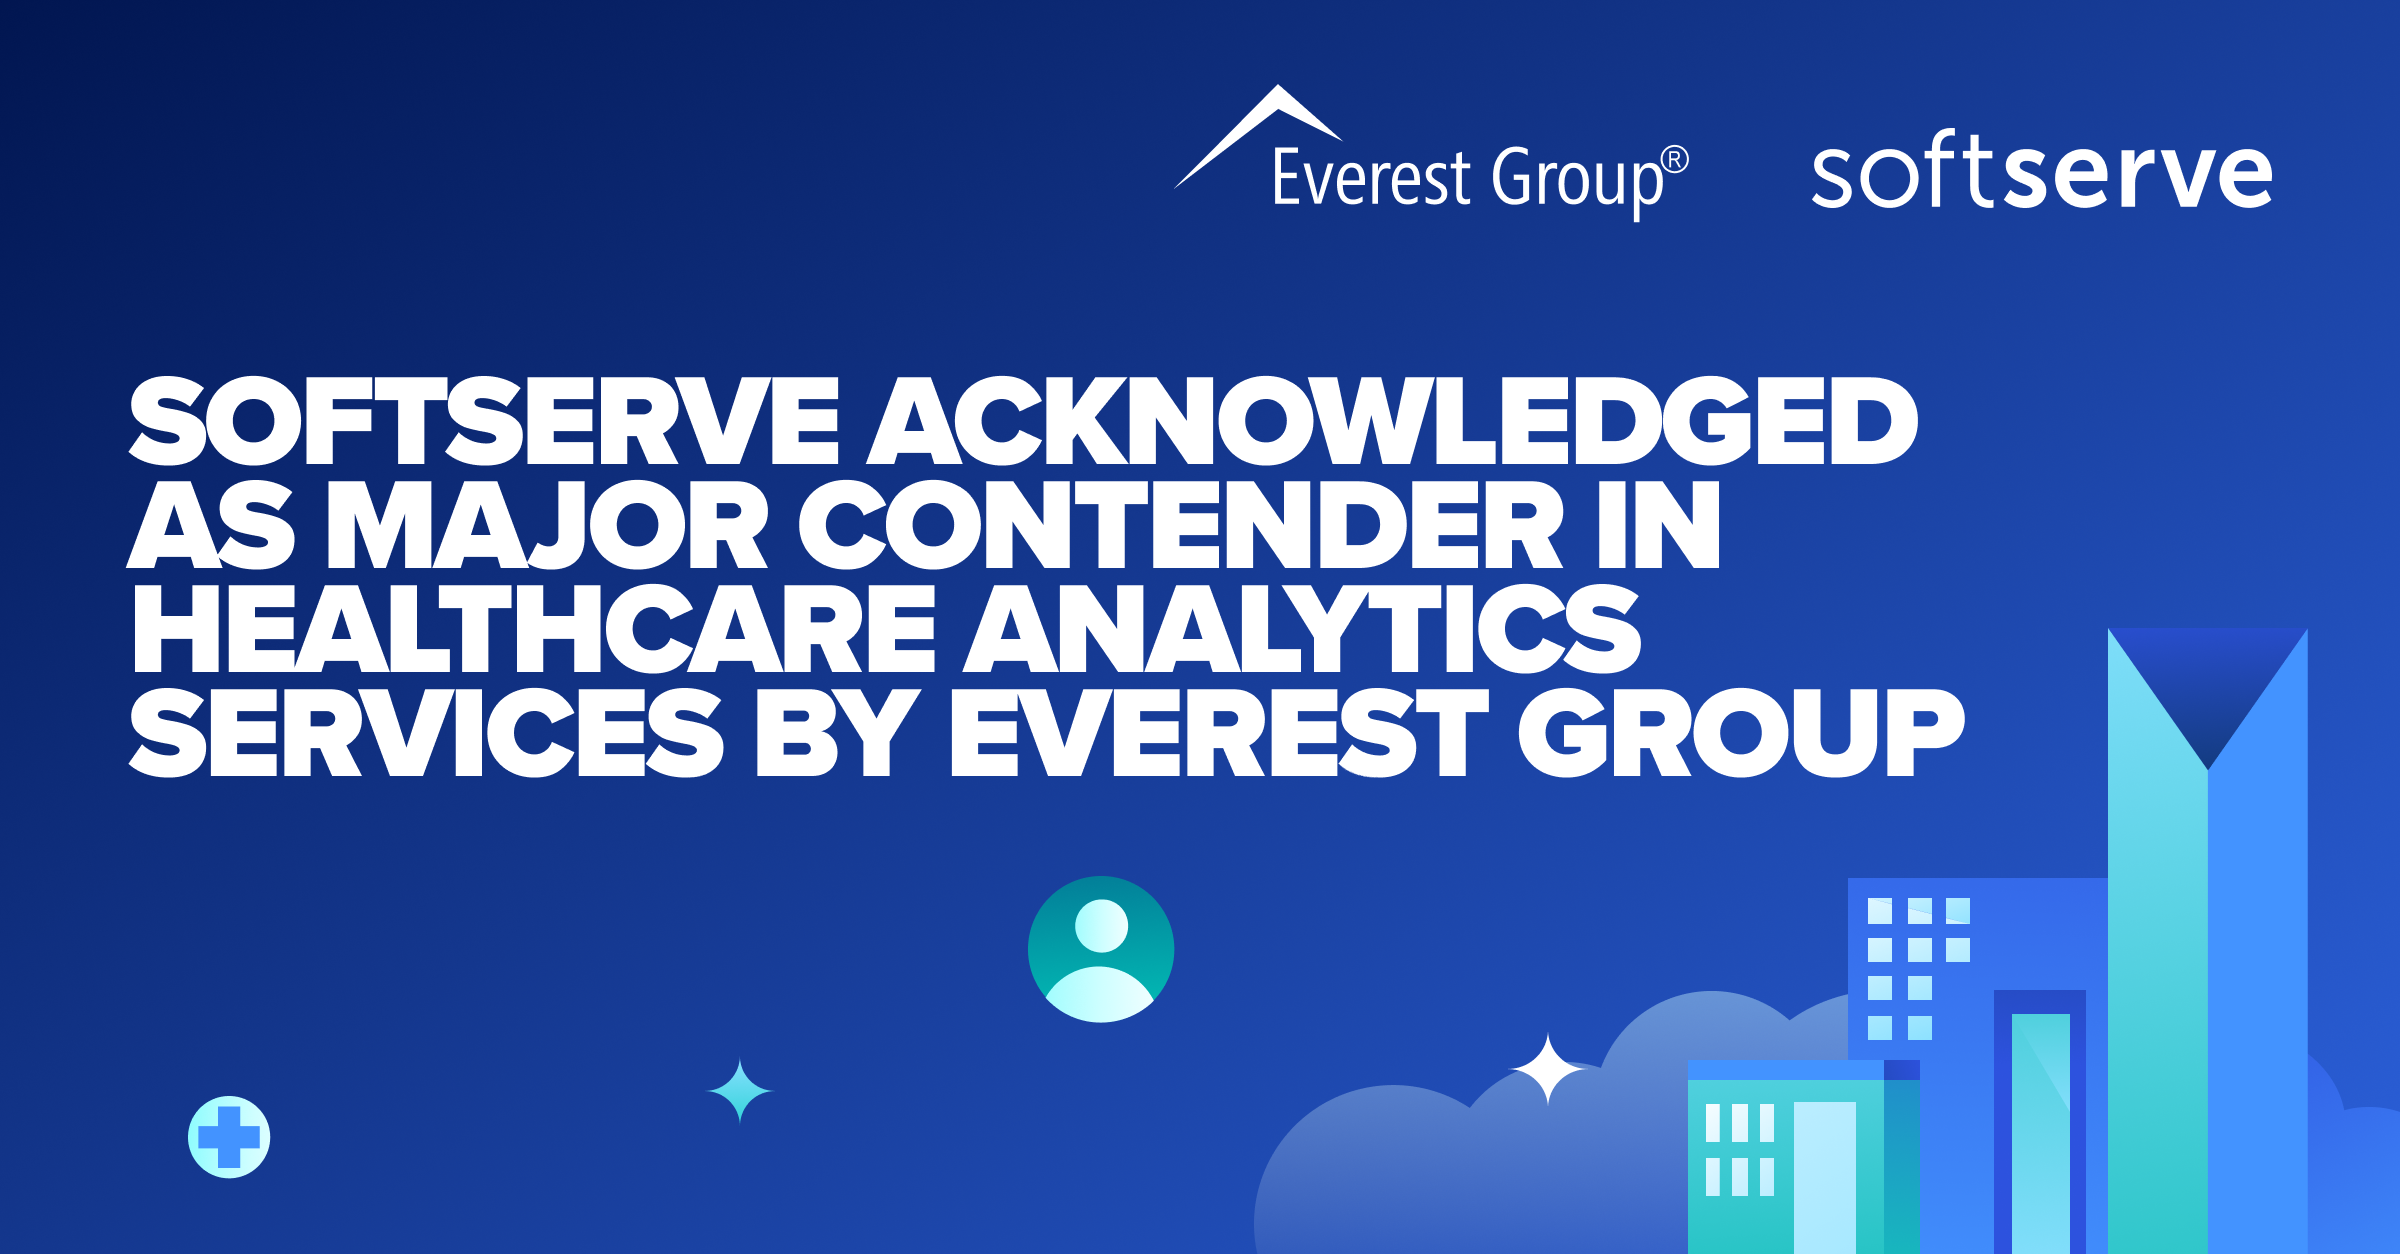 softserve-acknowledged-as-major-contender-in-healthcare-analytics-services-by-everest-group-social